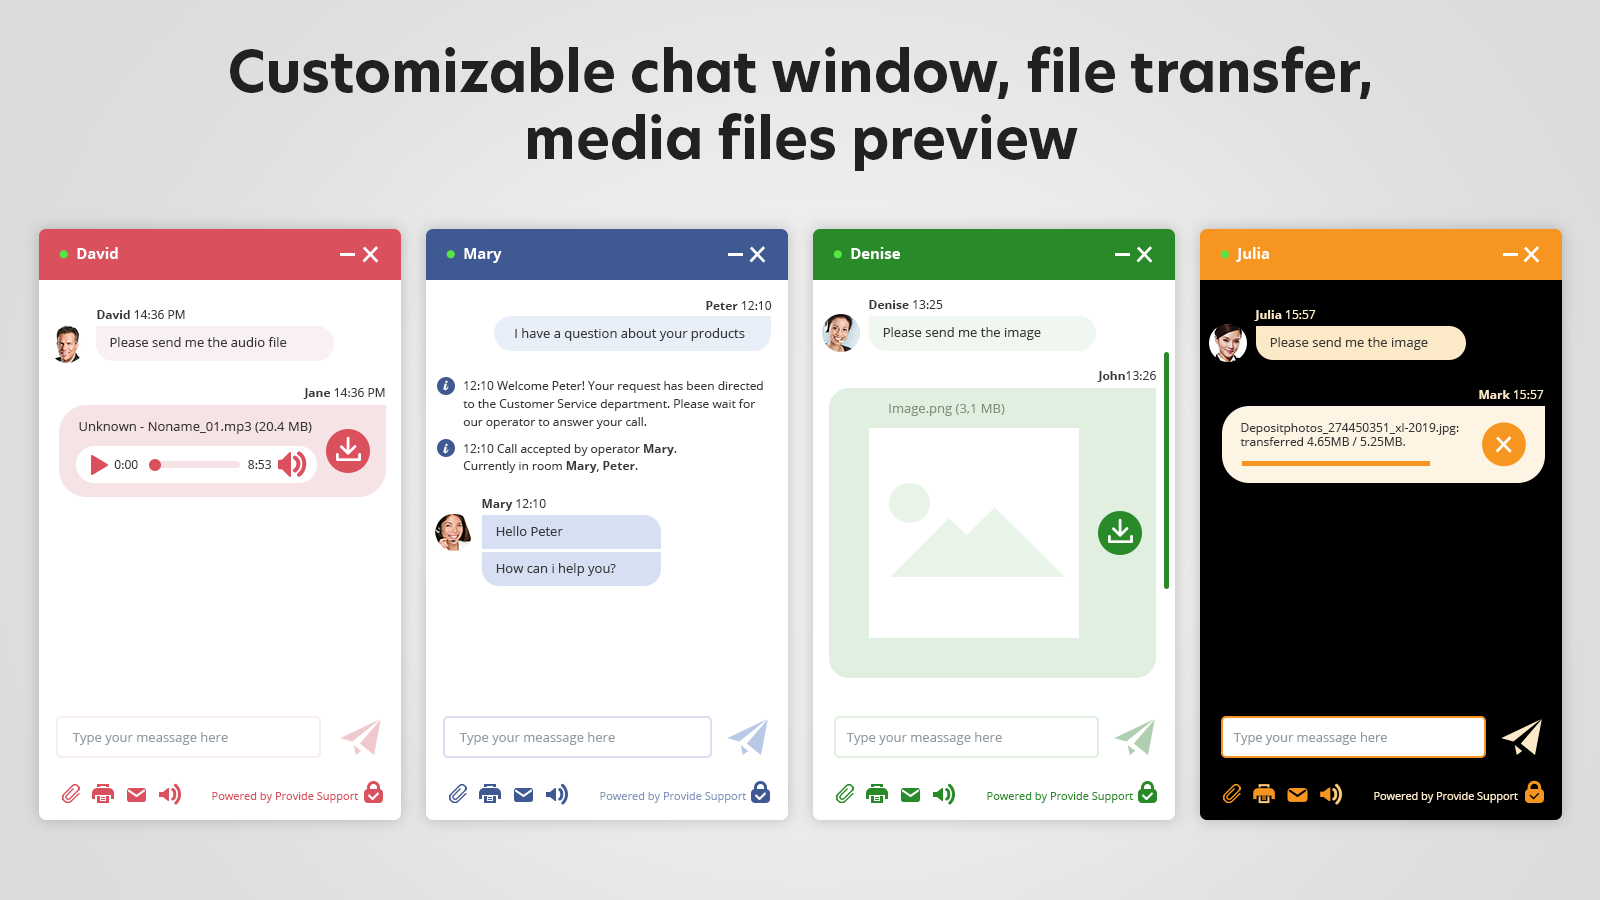 Chat window designs. We offer a wide variety of customization options. Choose any color, upload your company logo, define chat window size and position, decide which type of files can be transferred and much more